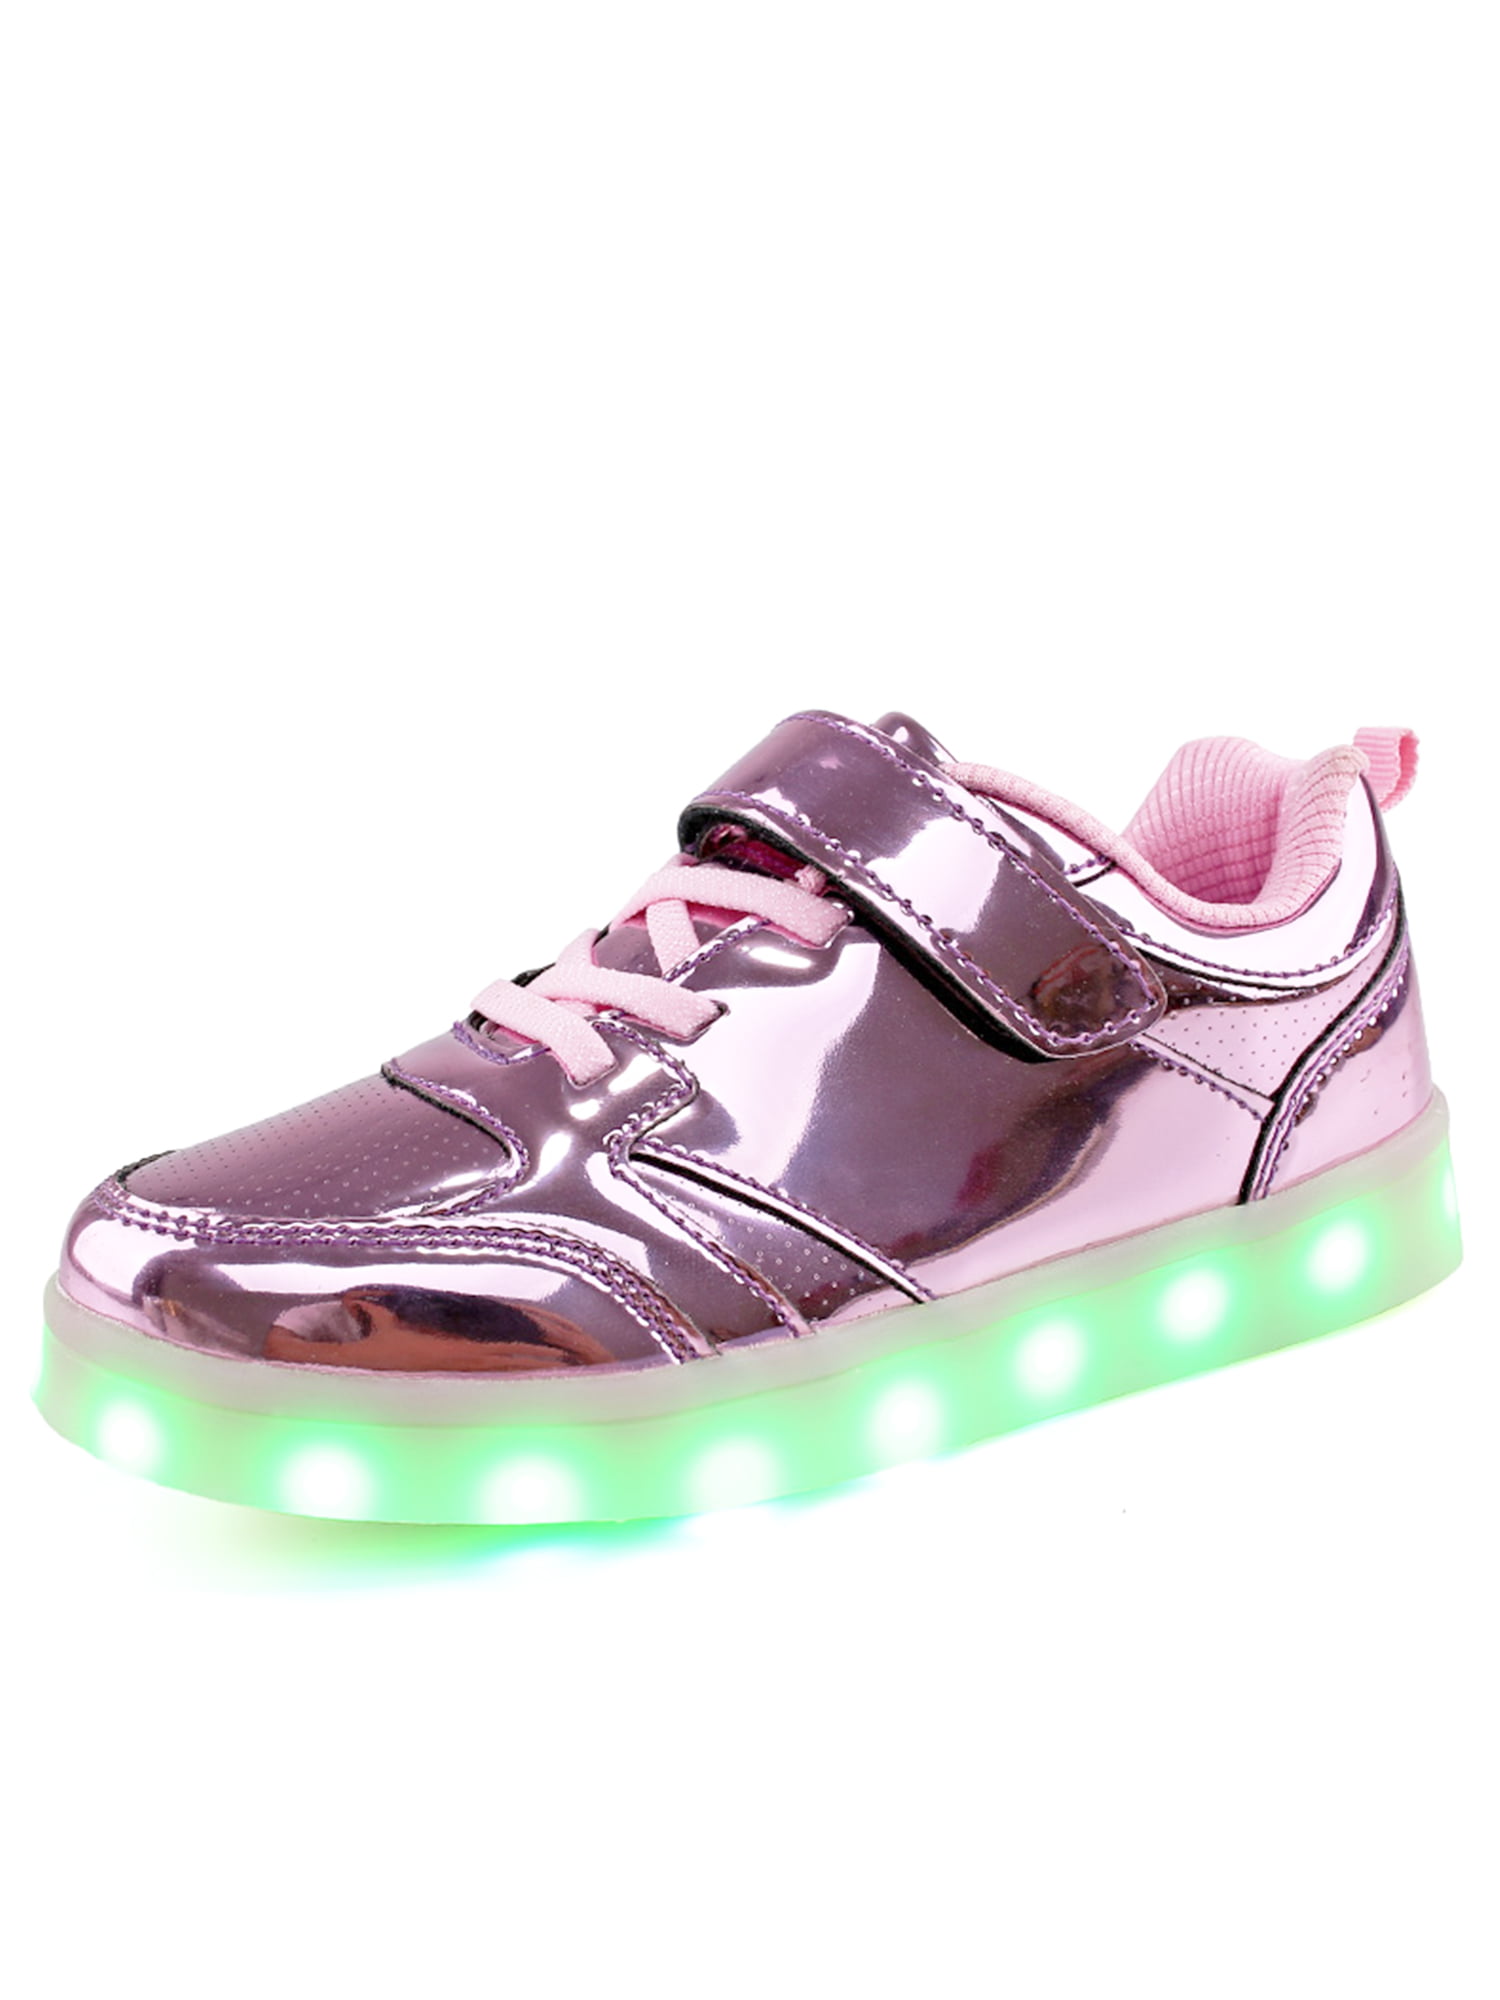 Own Shoe - LED Flashing Sneakers Light Up Shoes for Boys and Girls ...